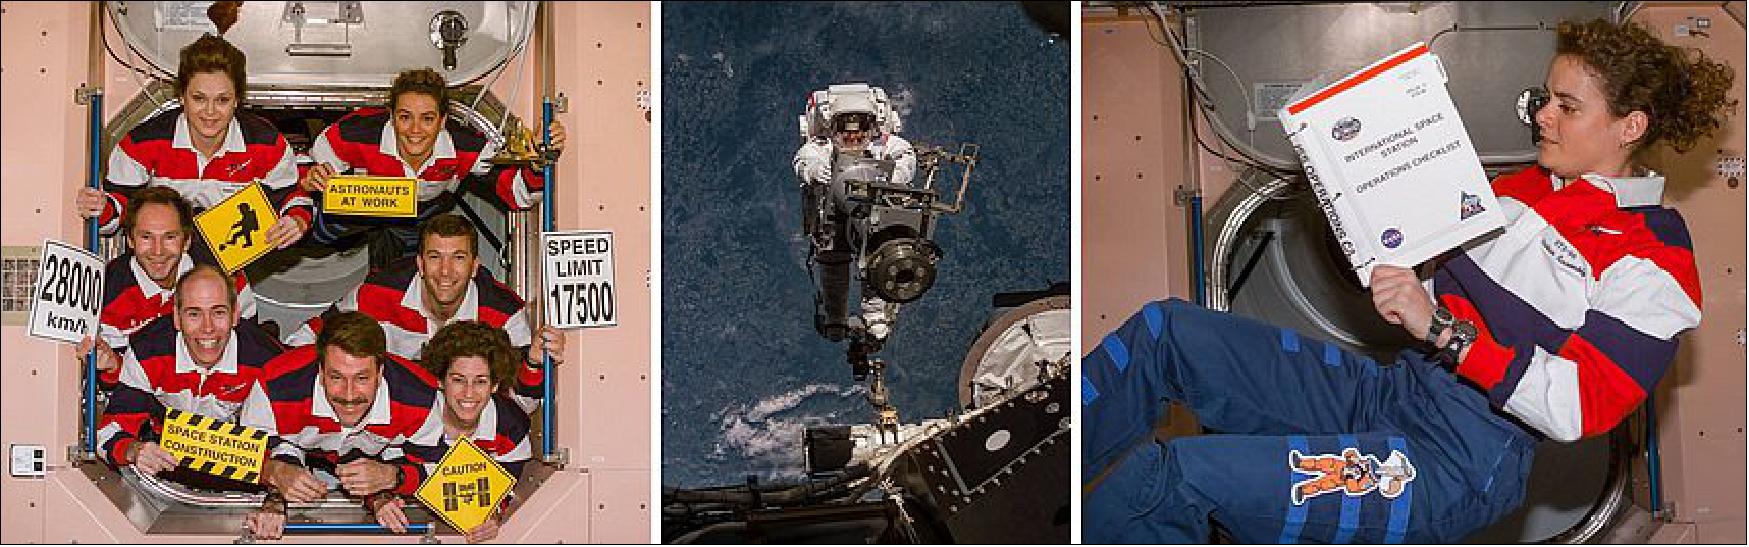 Figure 97: Left: STS-96 crew in the Unity Node 1 module, with Jernigan and Payette in the top row and Ochoa at bottom right. Middle: Jernigan during the STS-96 EVA. Right: Payette in the Unity Node 1 module (image credit: JASA/JSC)